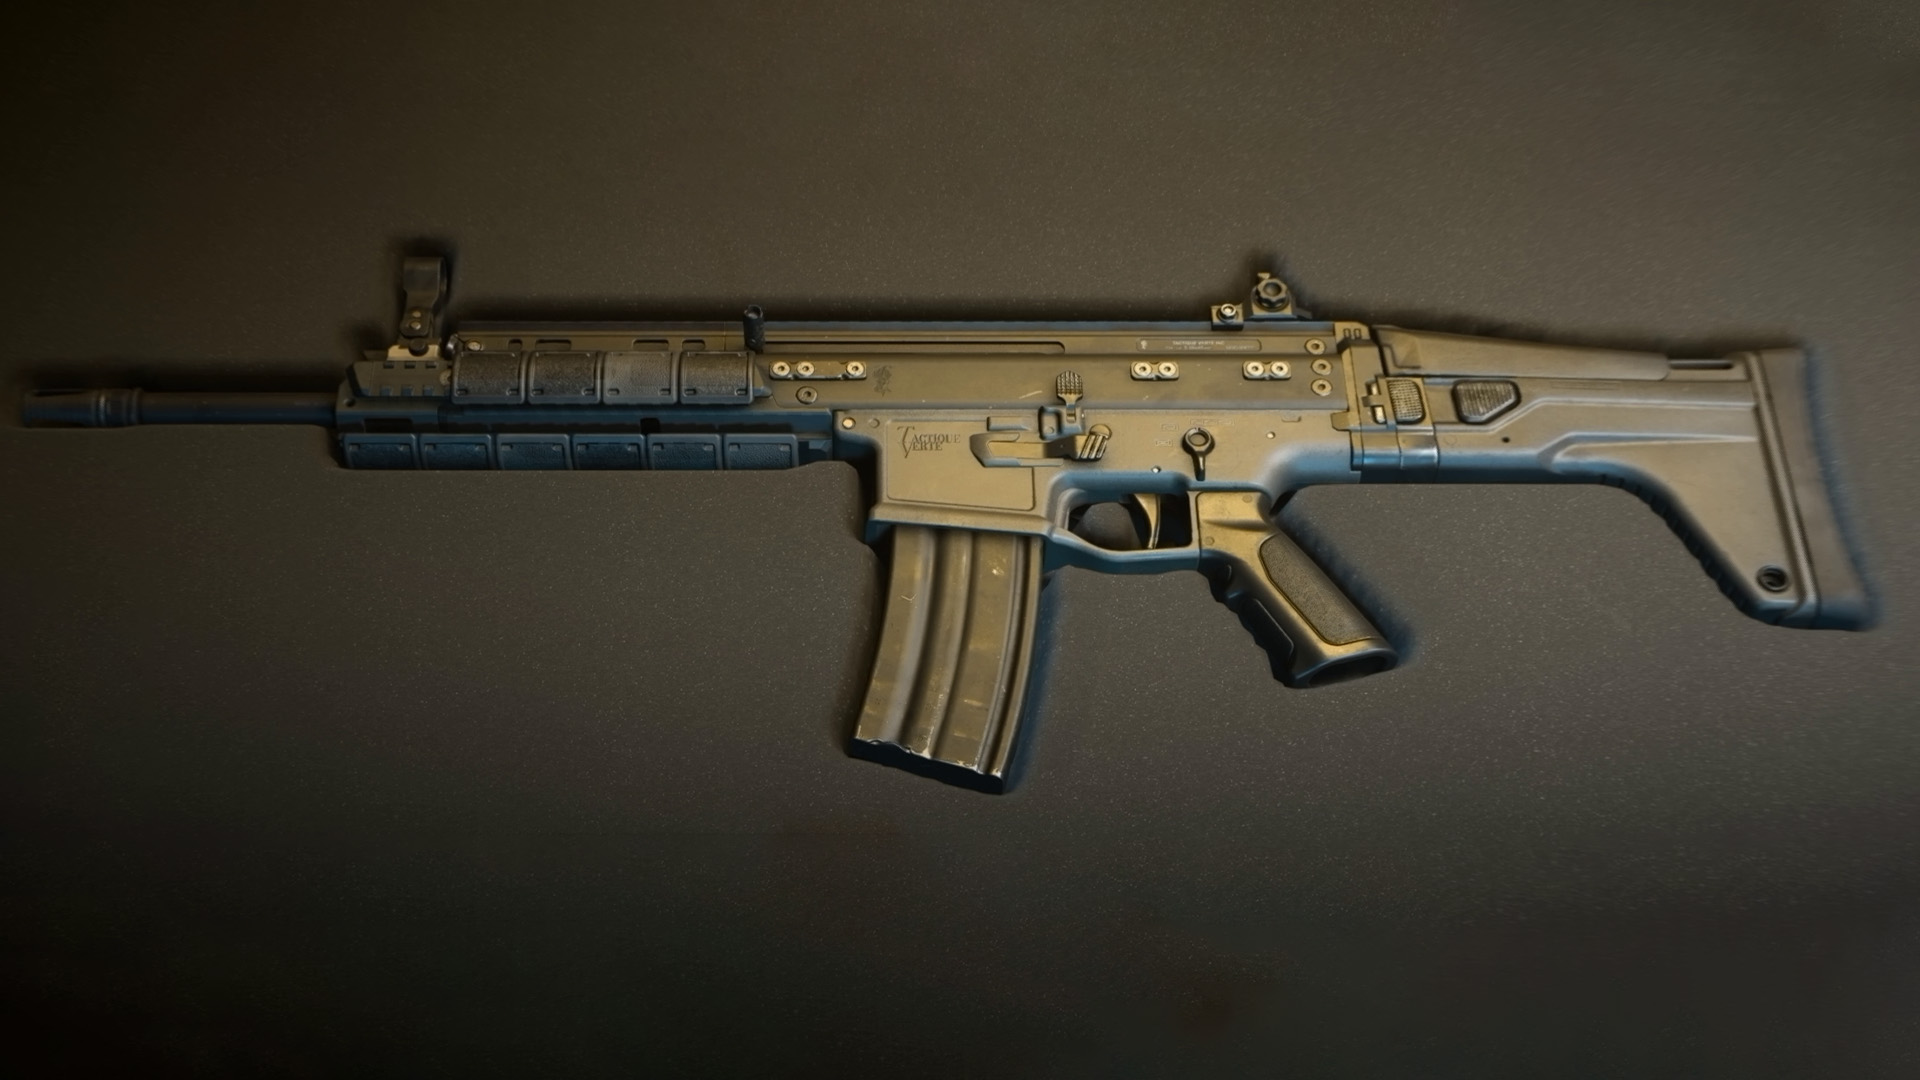 All Modern Warfare 2 Weapons List: All Weapons in MW2 and Real